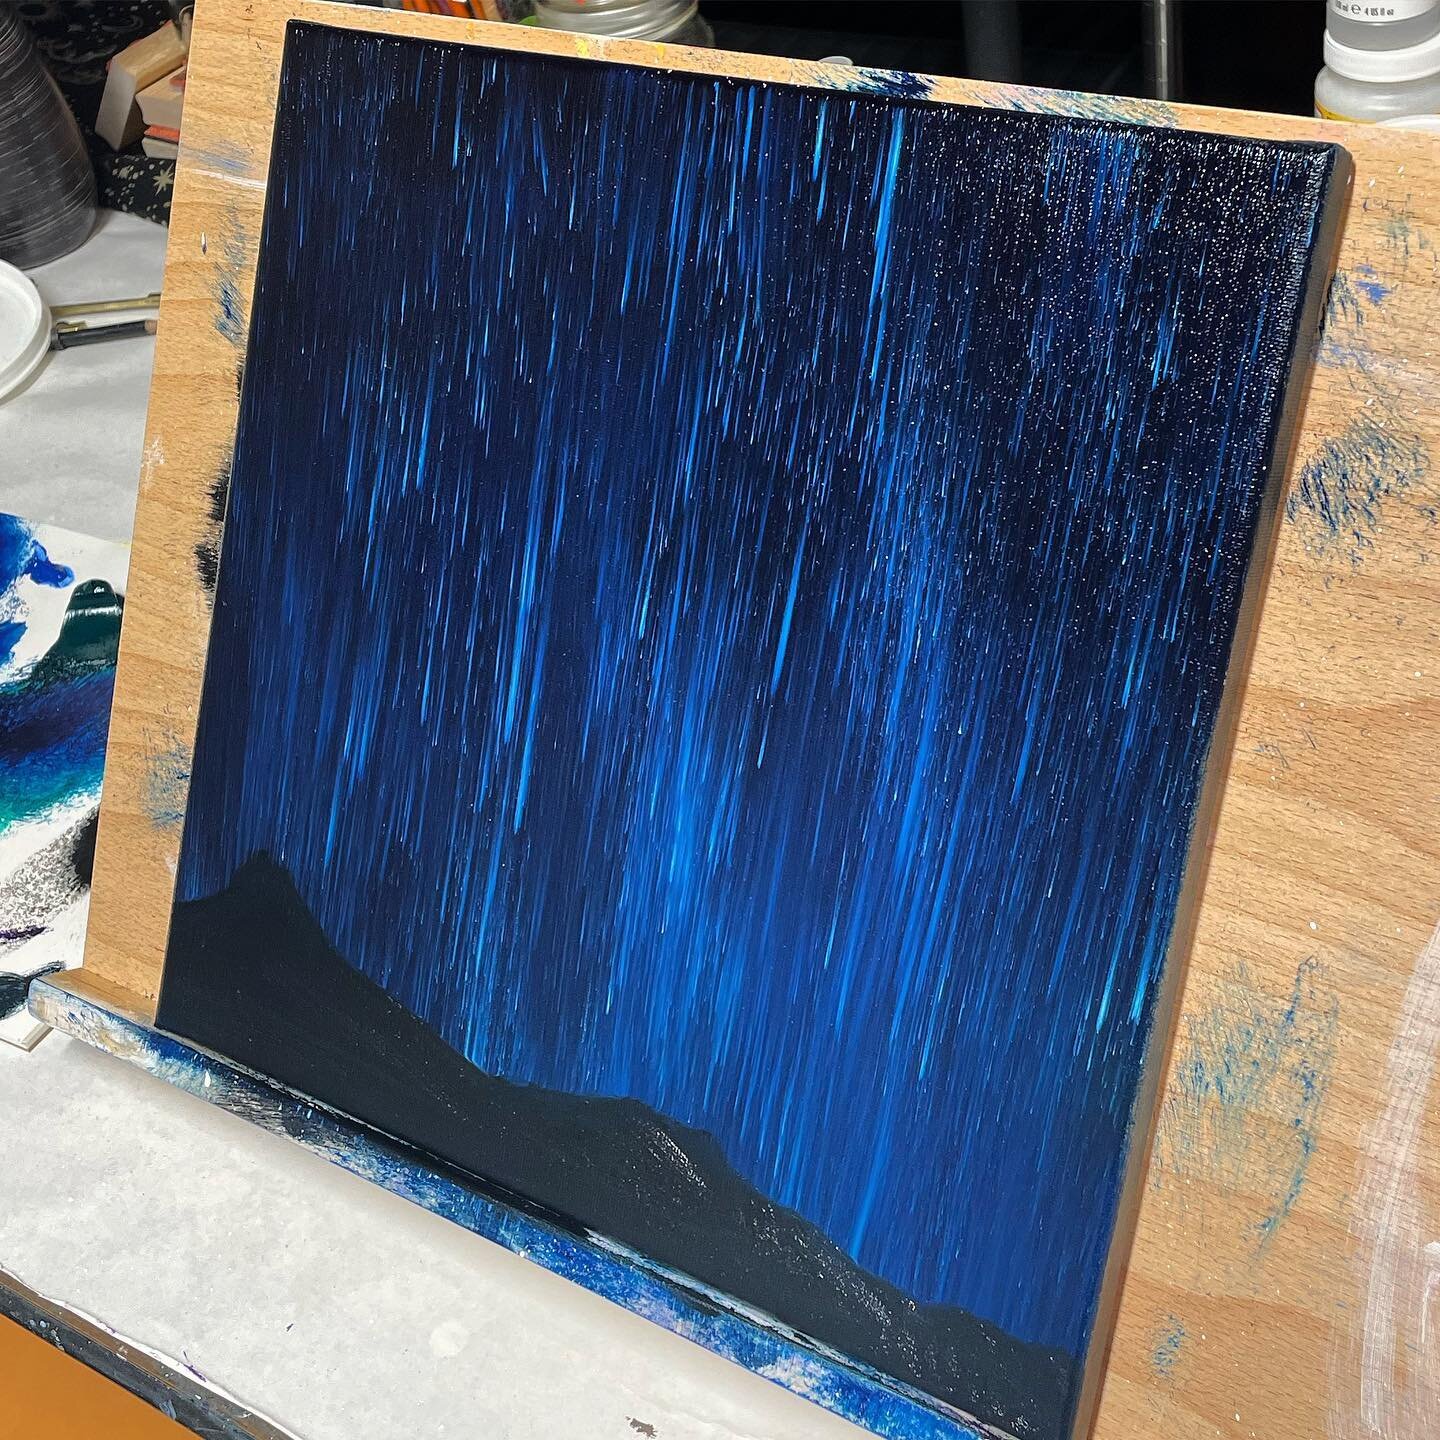 One of my current oil works in progress. I kinda have a thing for the night sky right now. 😍🌙✨

#oiloncanvas #landscape #oillandscape #happytrees #oilpainting #artistsoninstagram #artistsofinstagram #614life #handmadeohio #ohiohandmade #ohiocreativ